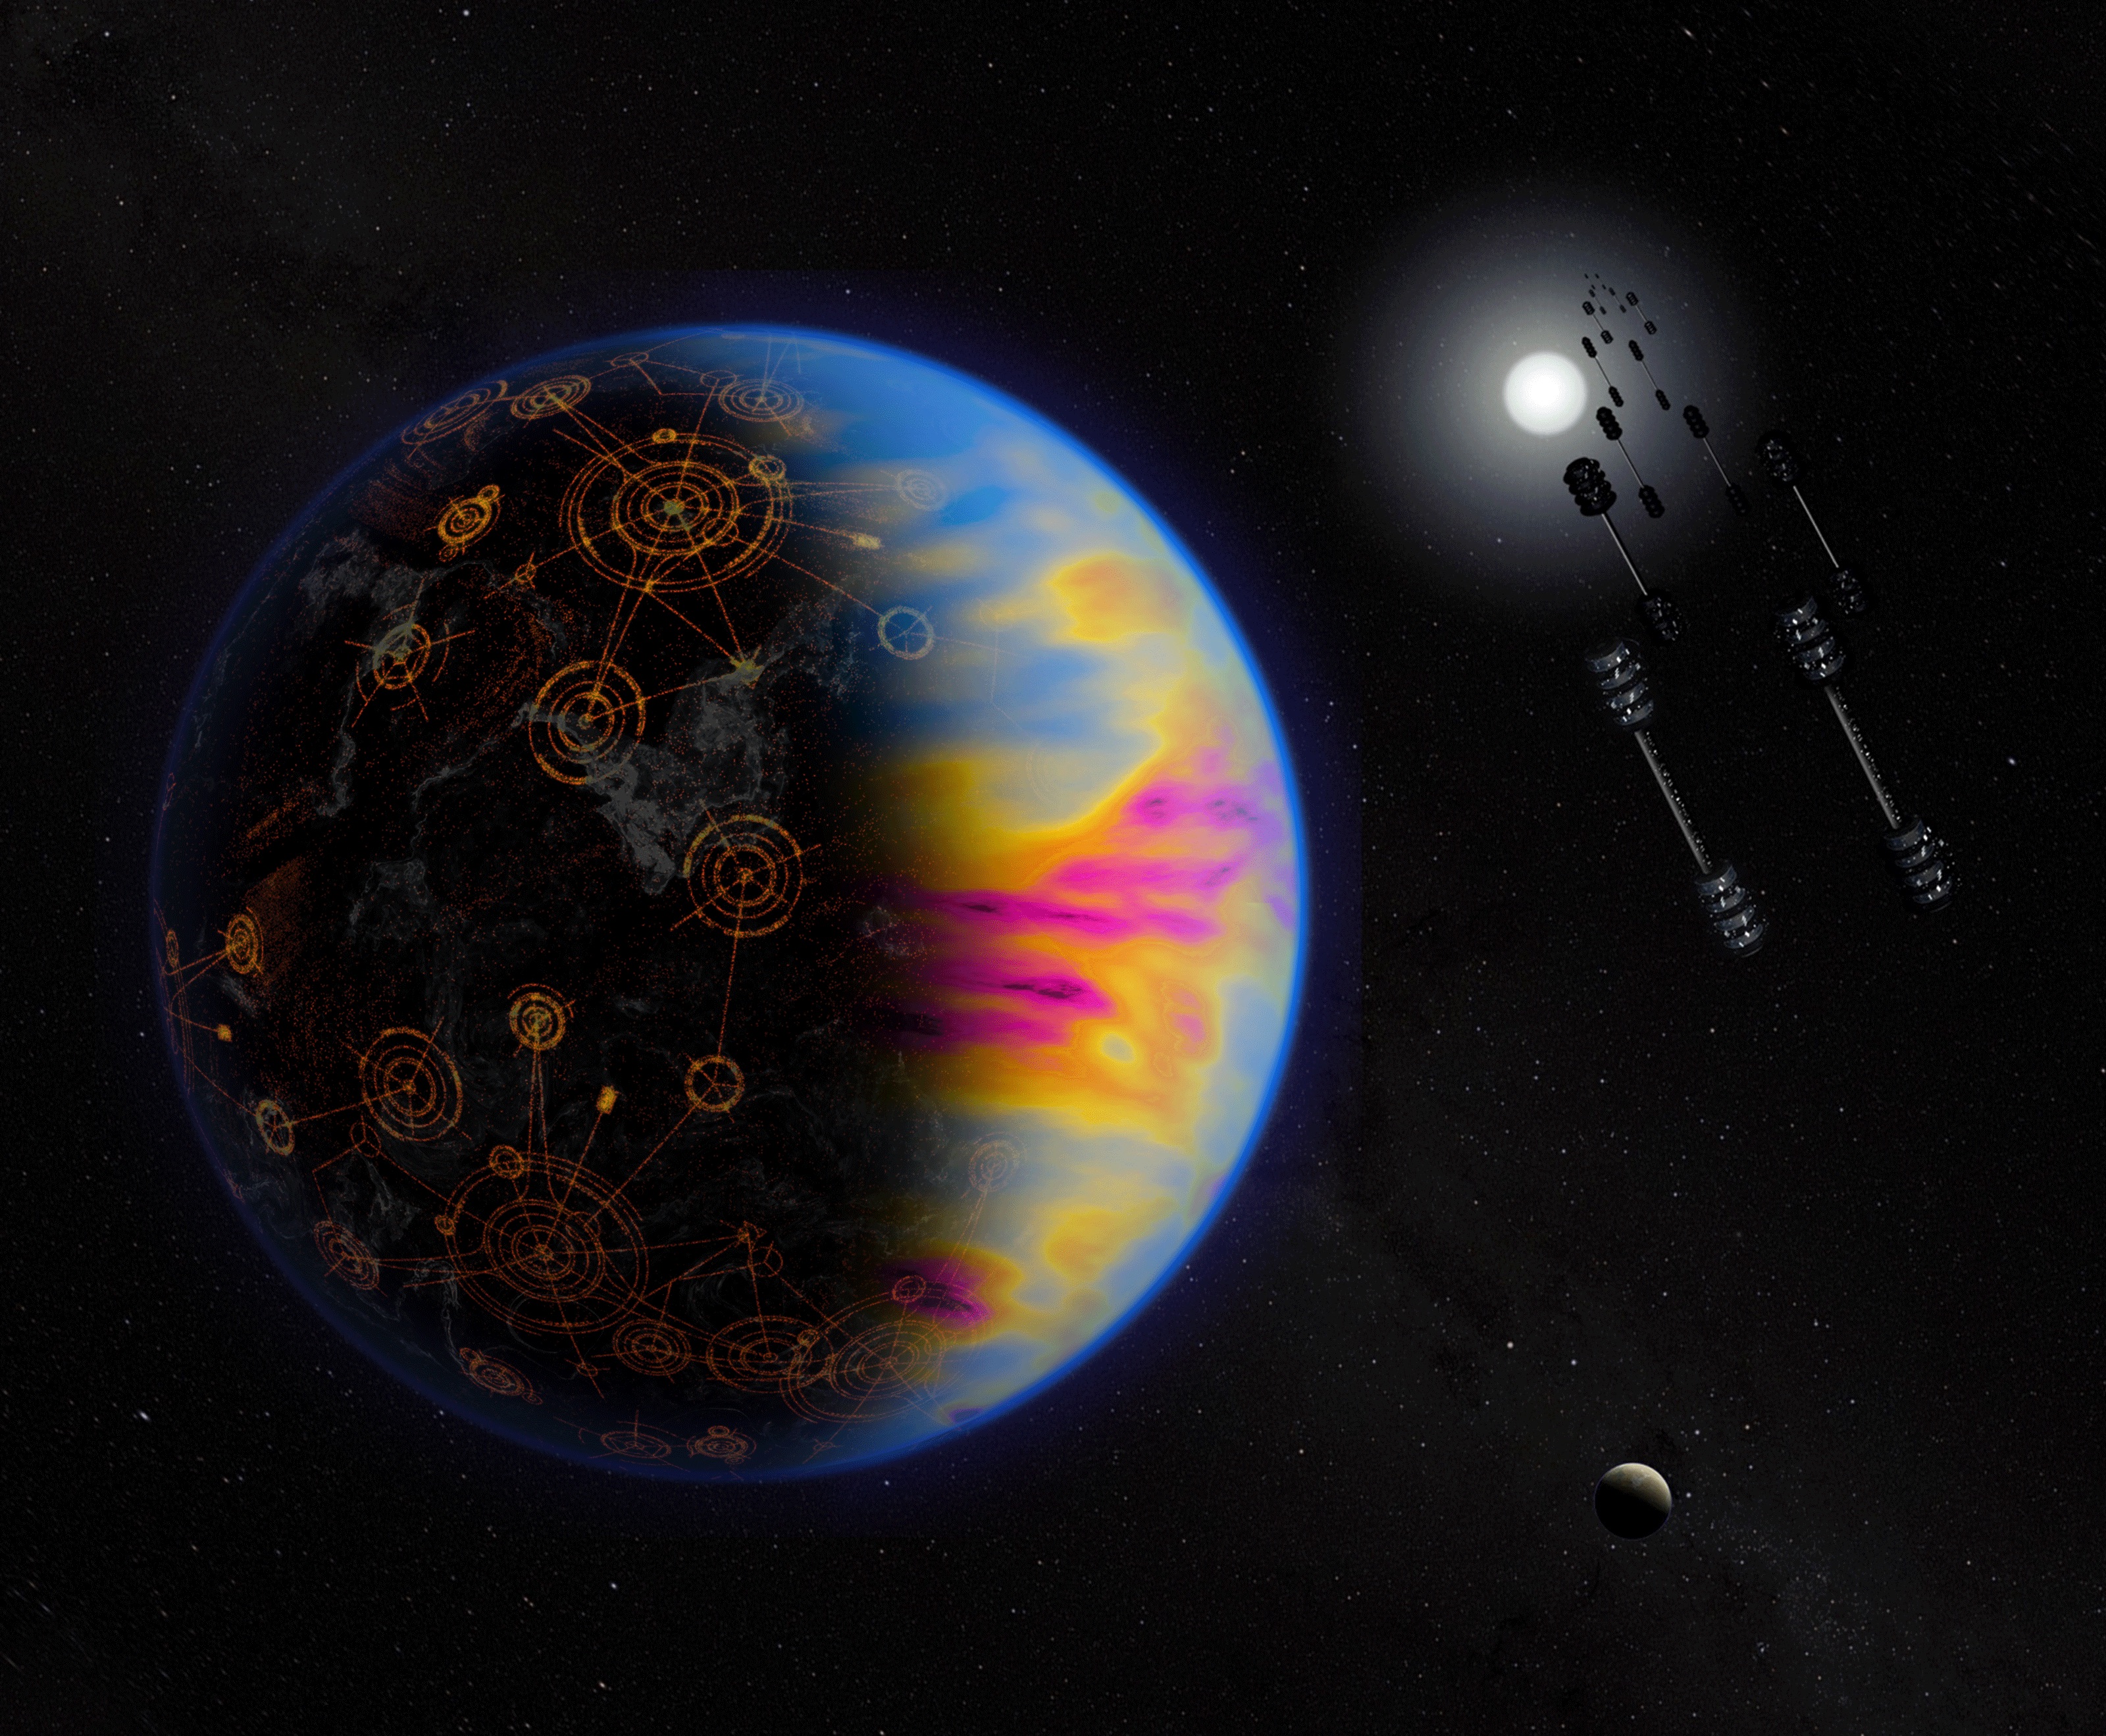 Conceptual image of an exoplanet with an advanced extraterrestrial civilization.